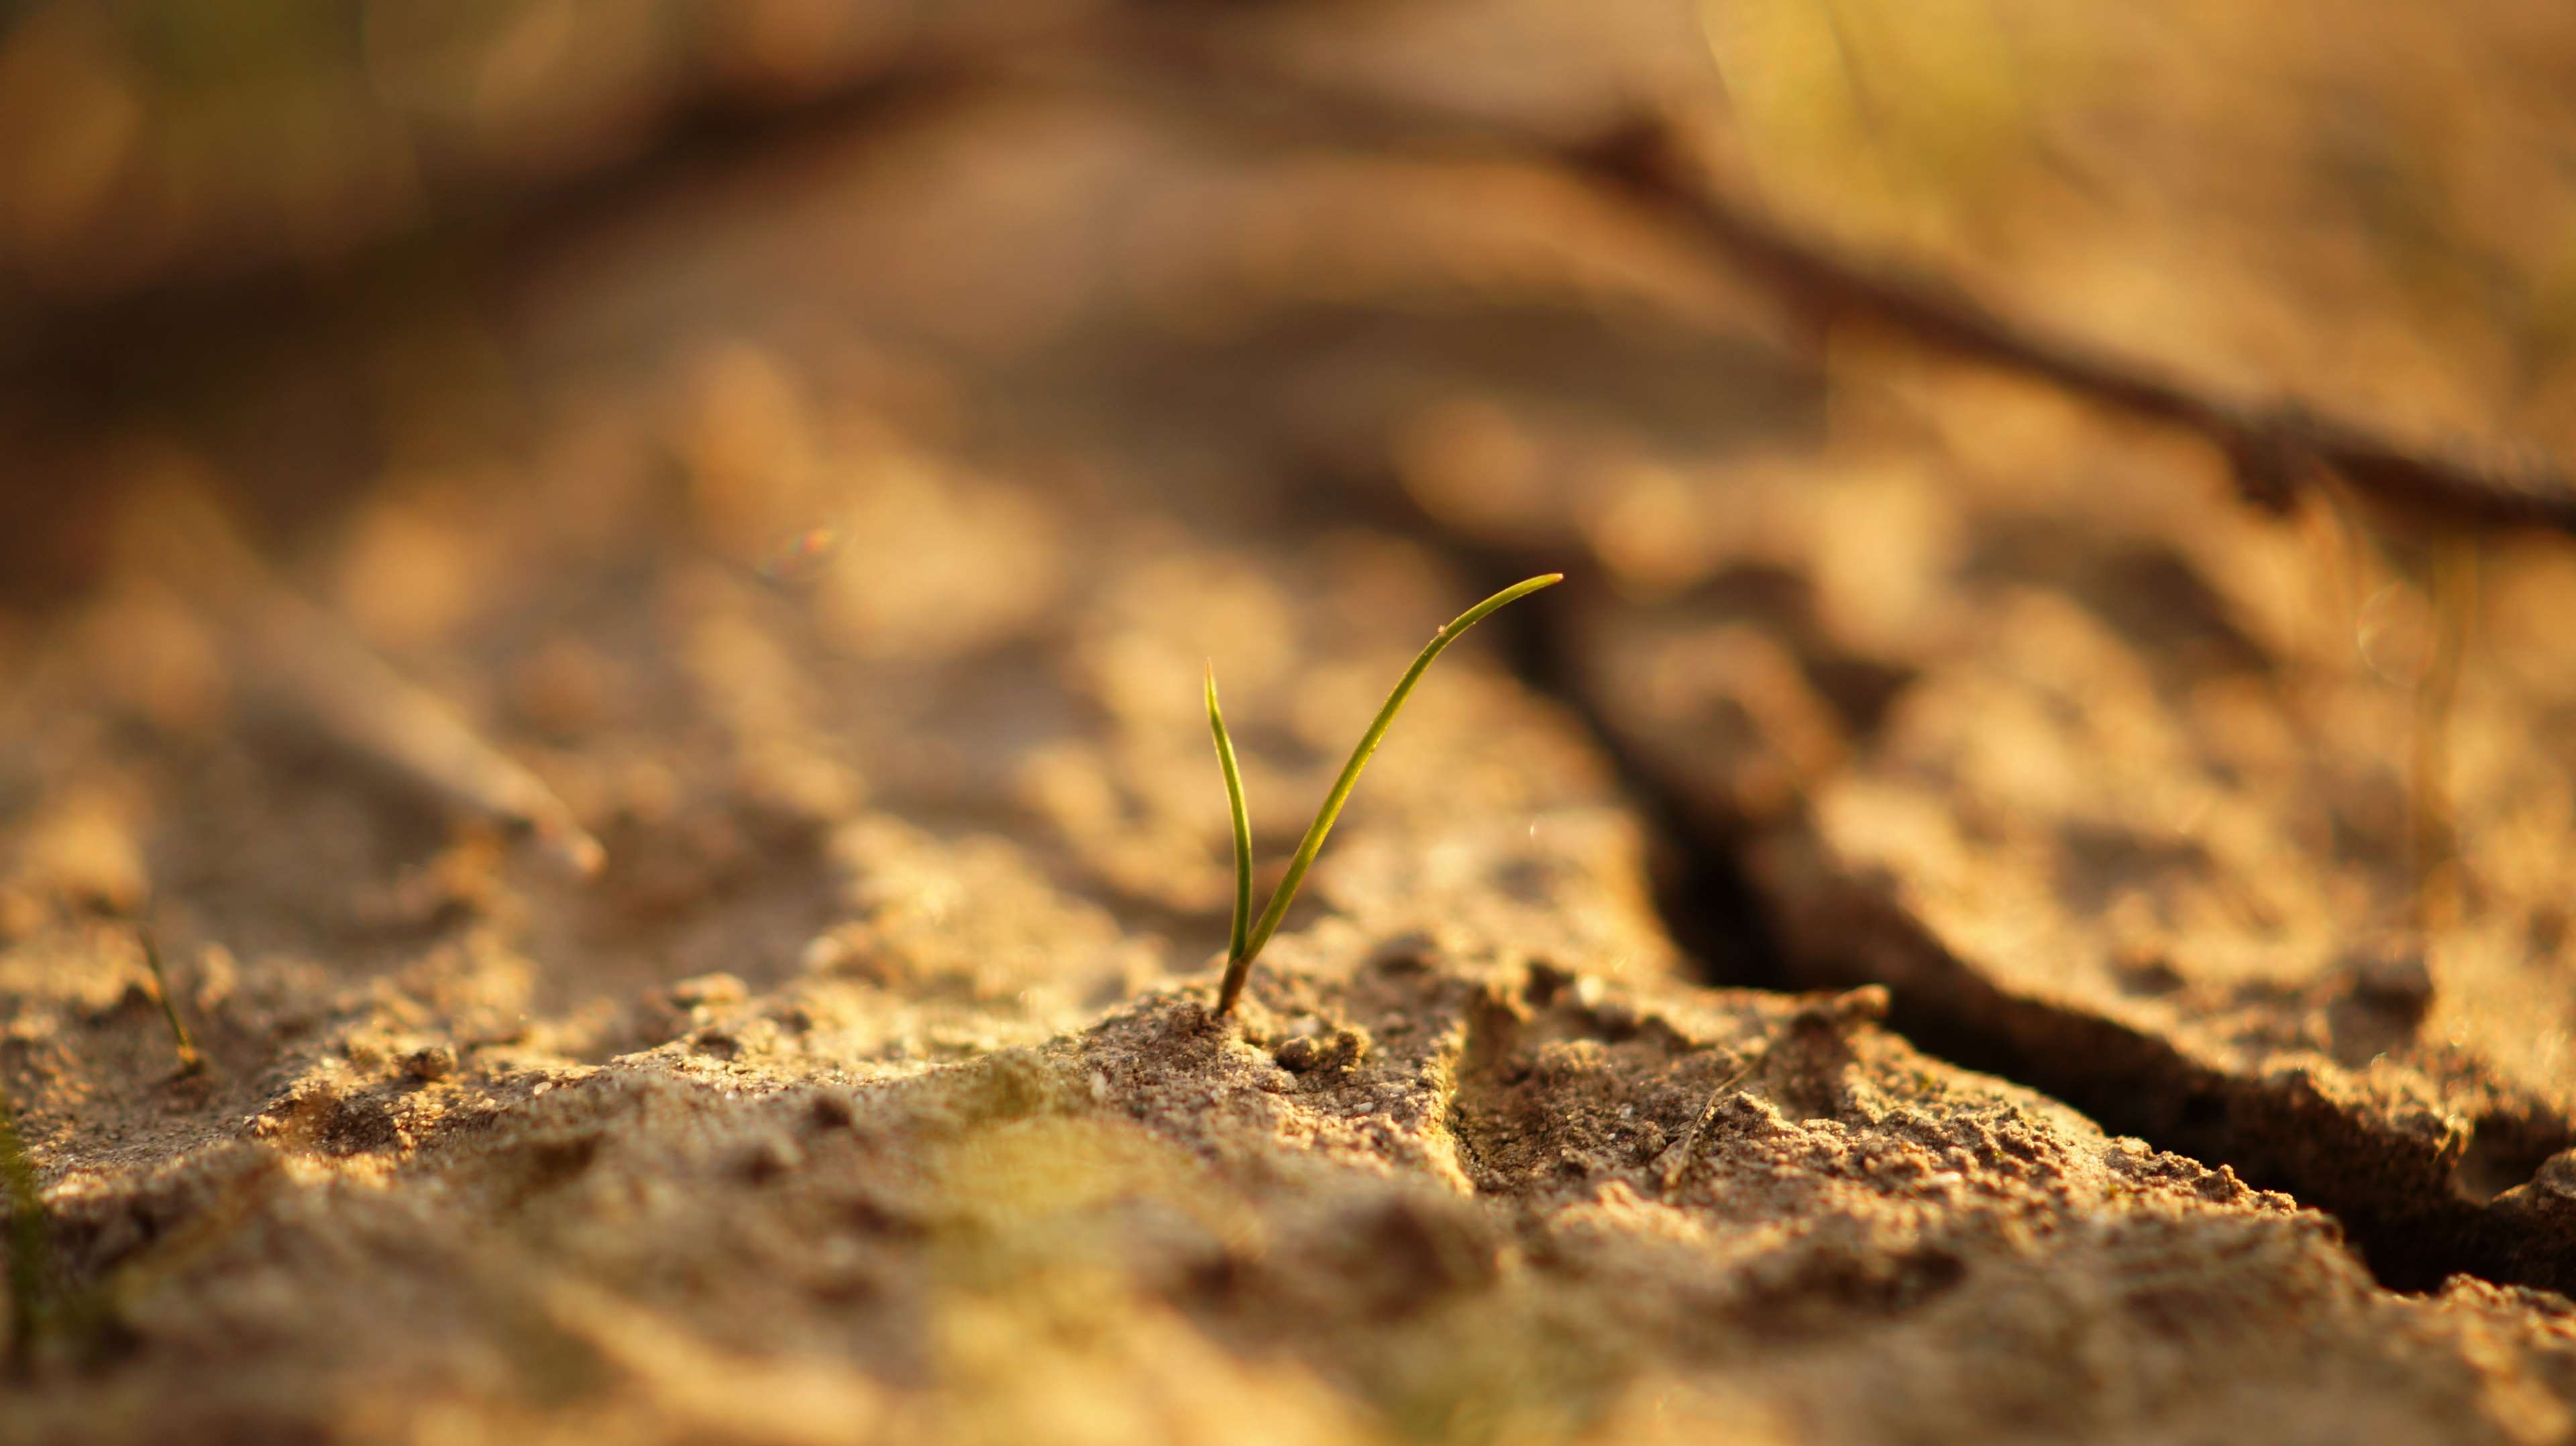 close up, close up view, dry, environment, ground